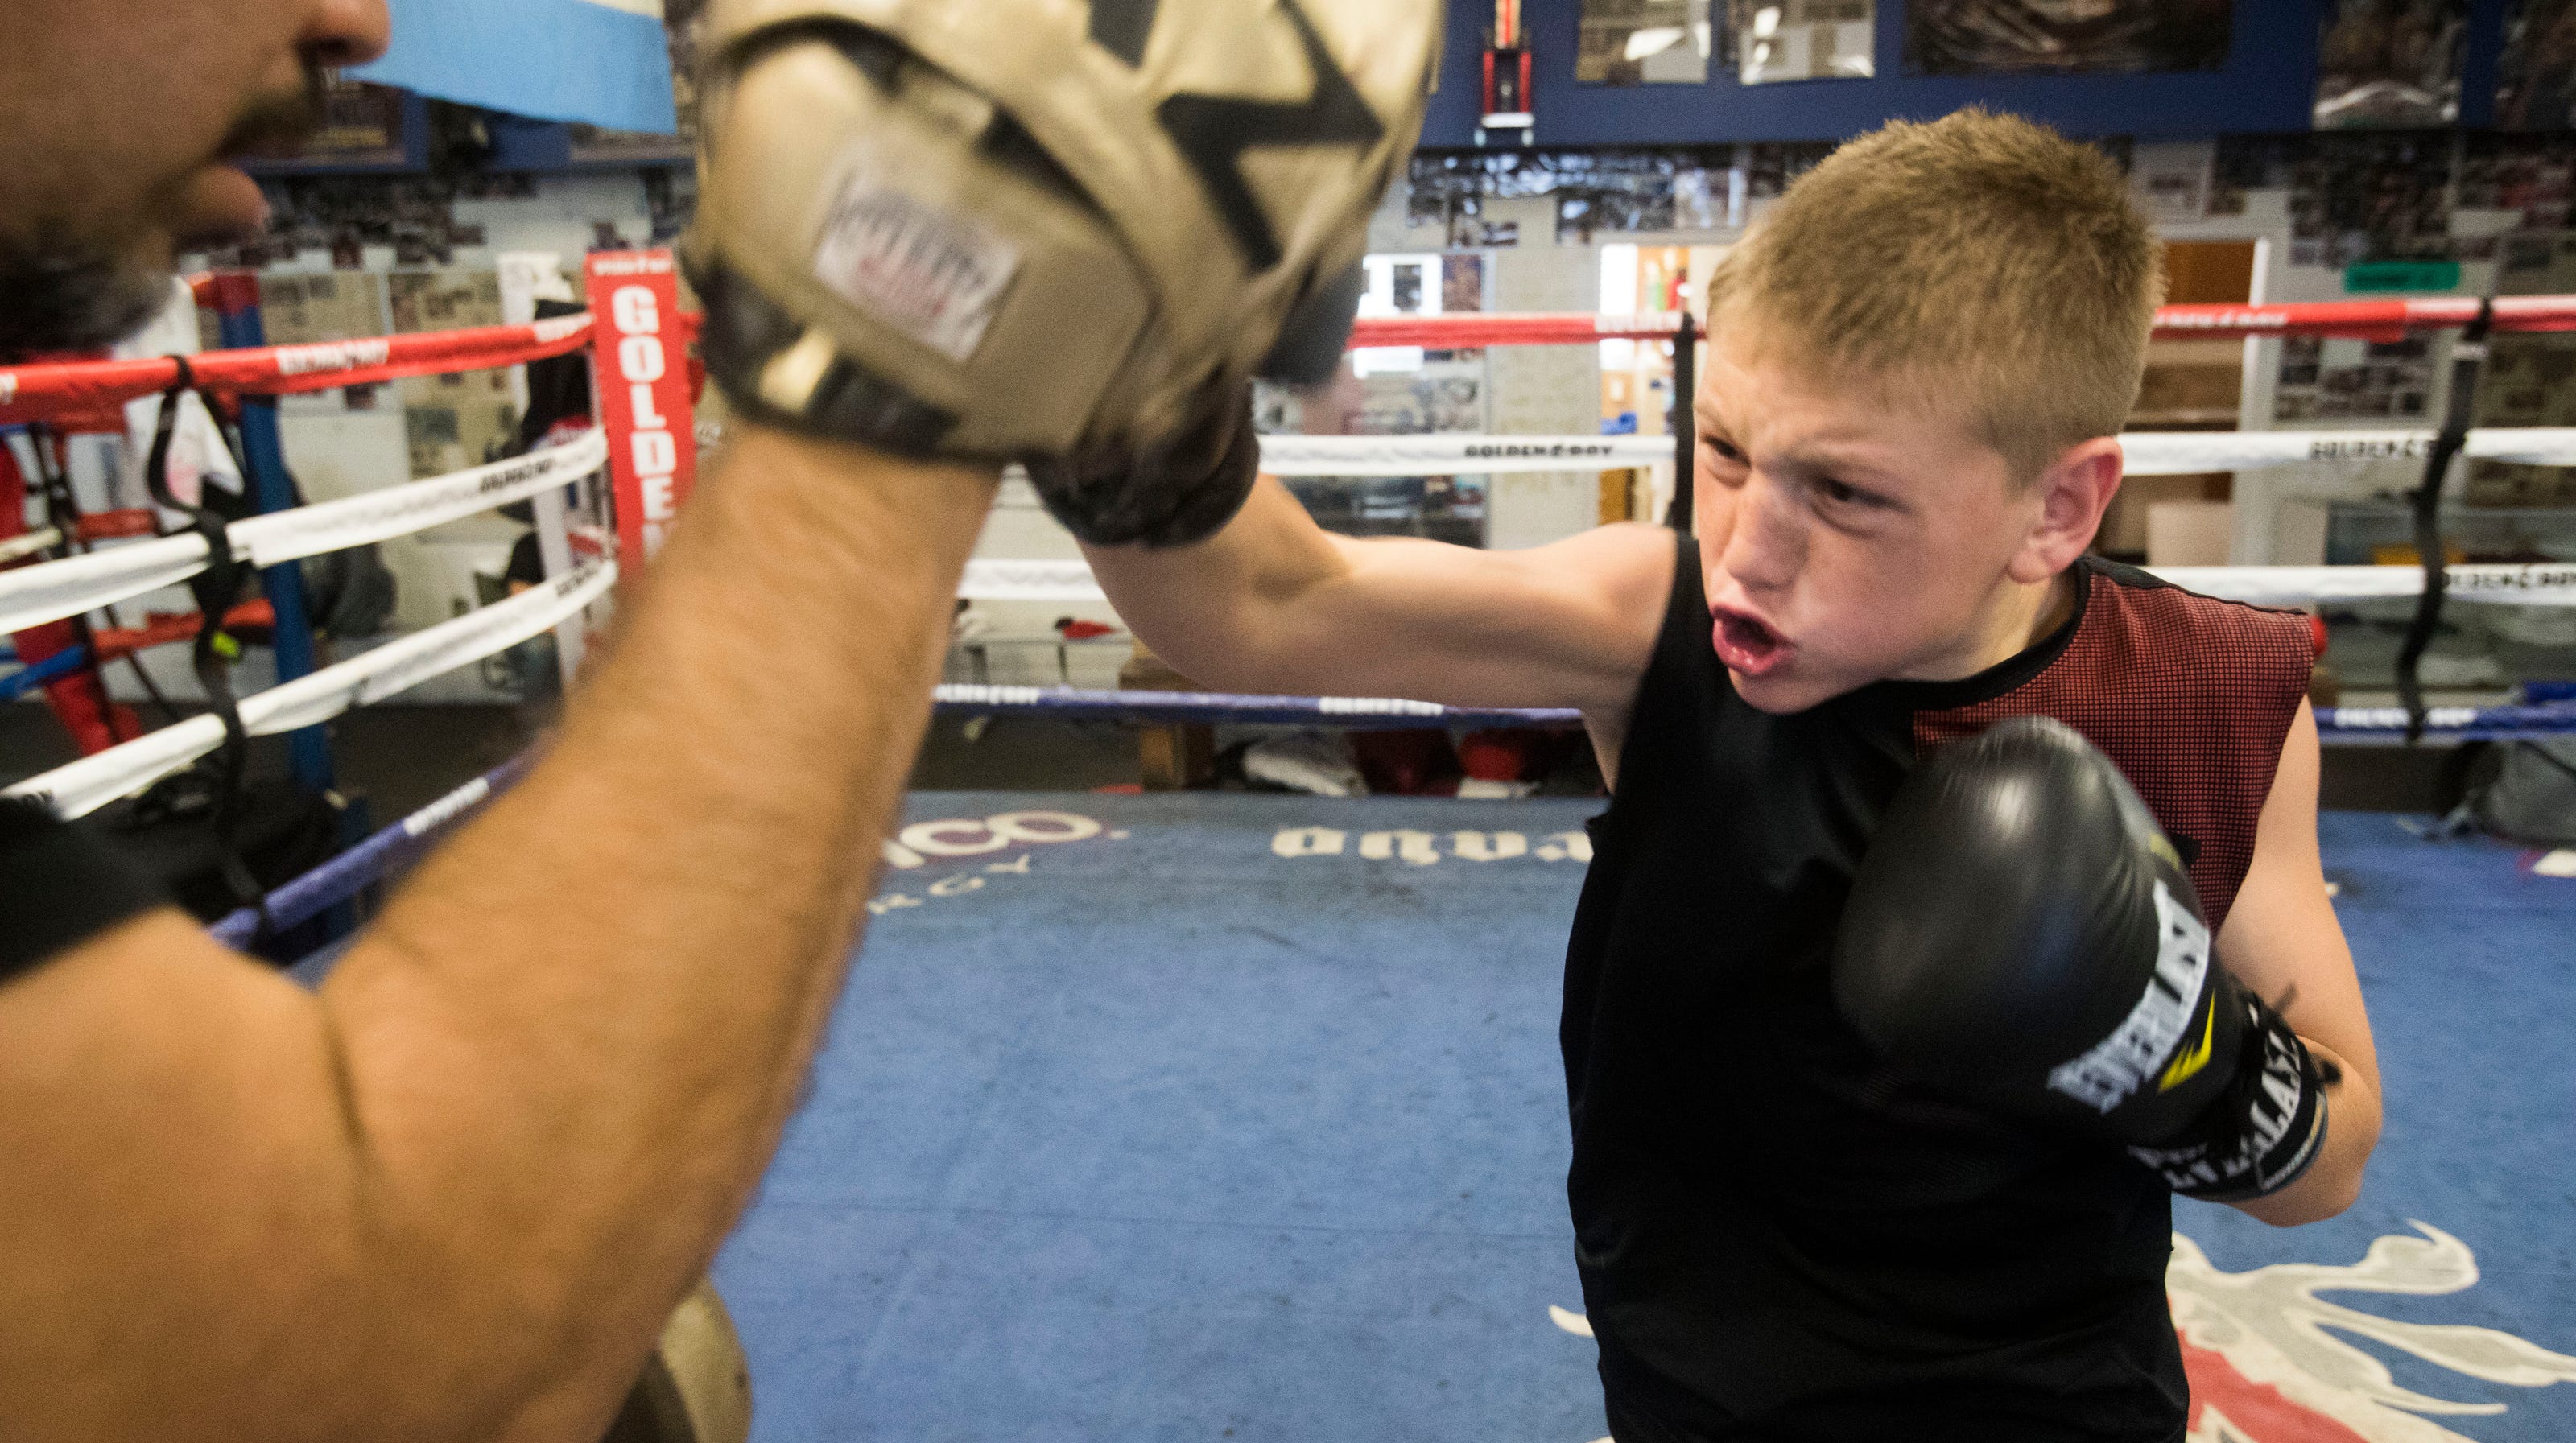 Springs area 13-year-old Cayden Griffiths chases dream